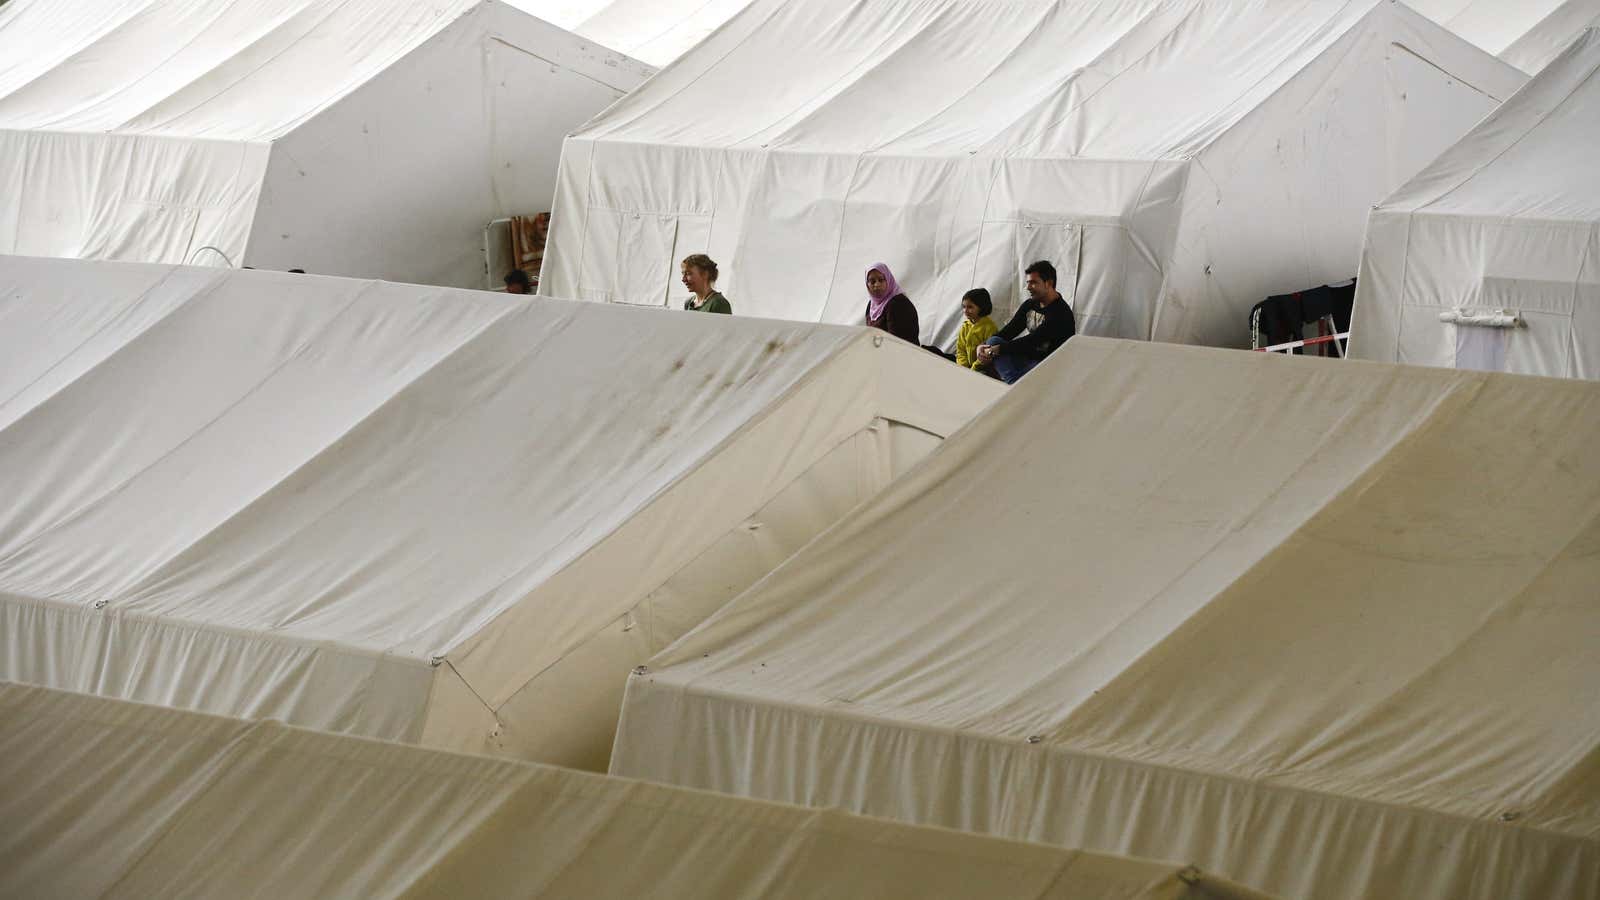 People gather among tents at a shelter for migrants inside a hangar of the former Tempelhof airport in Berlin.